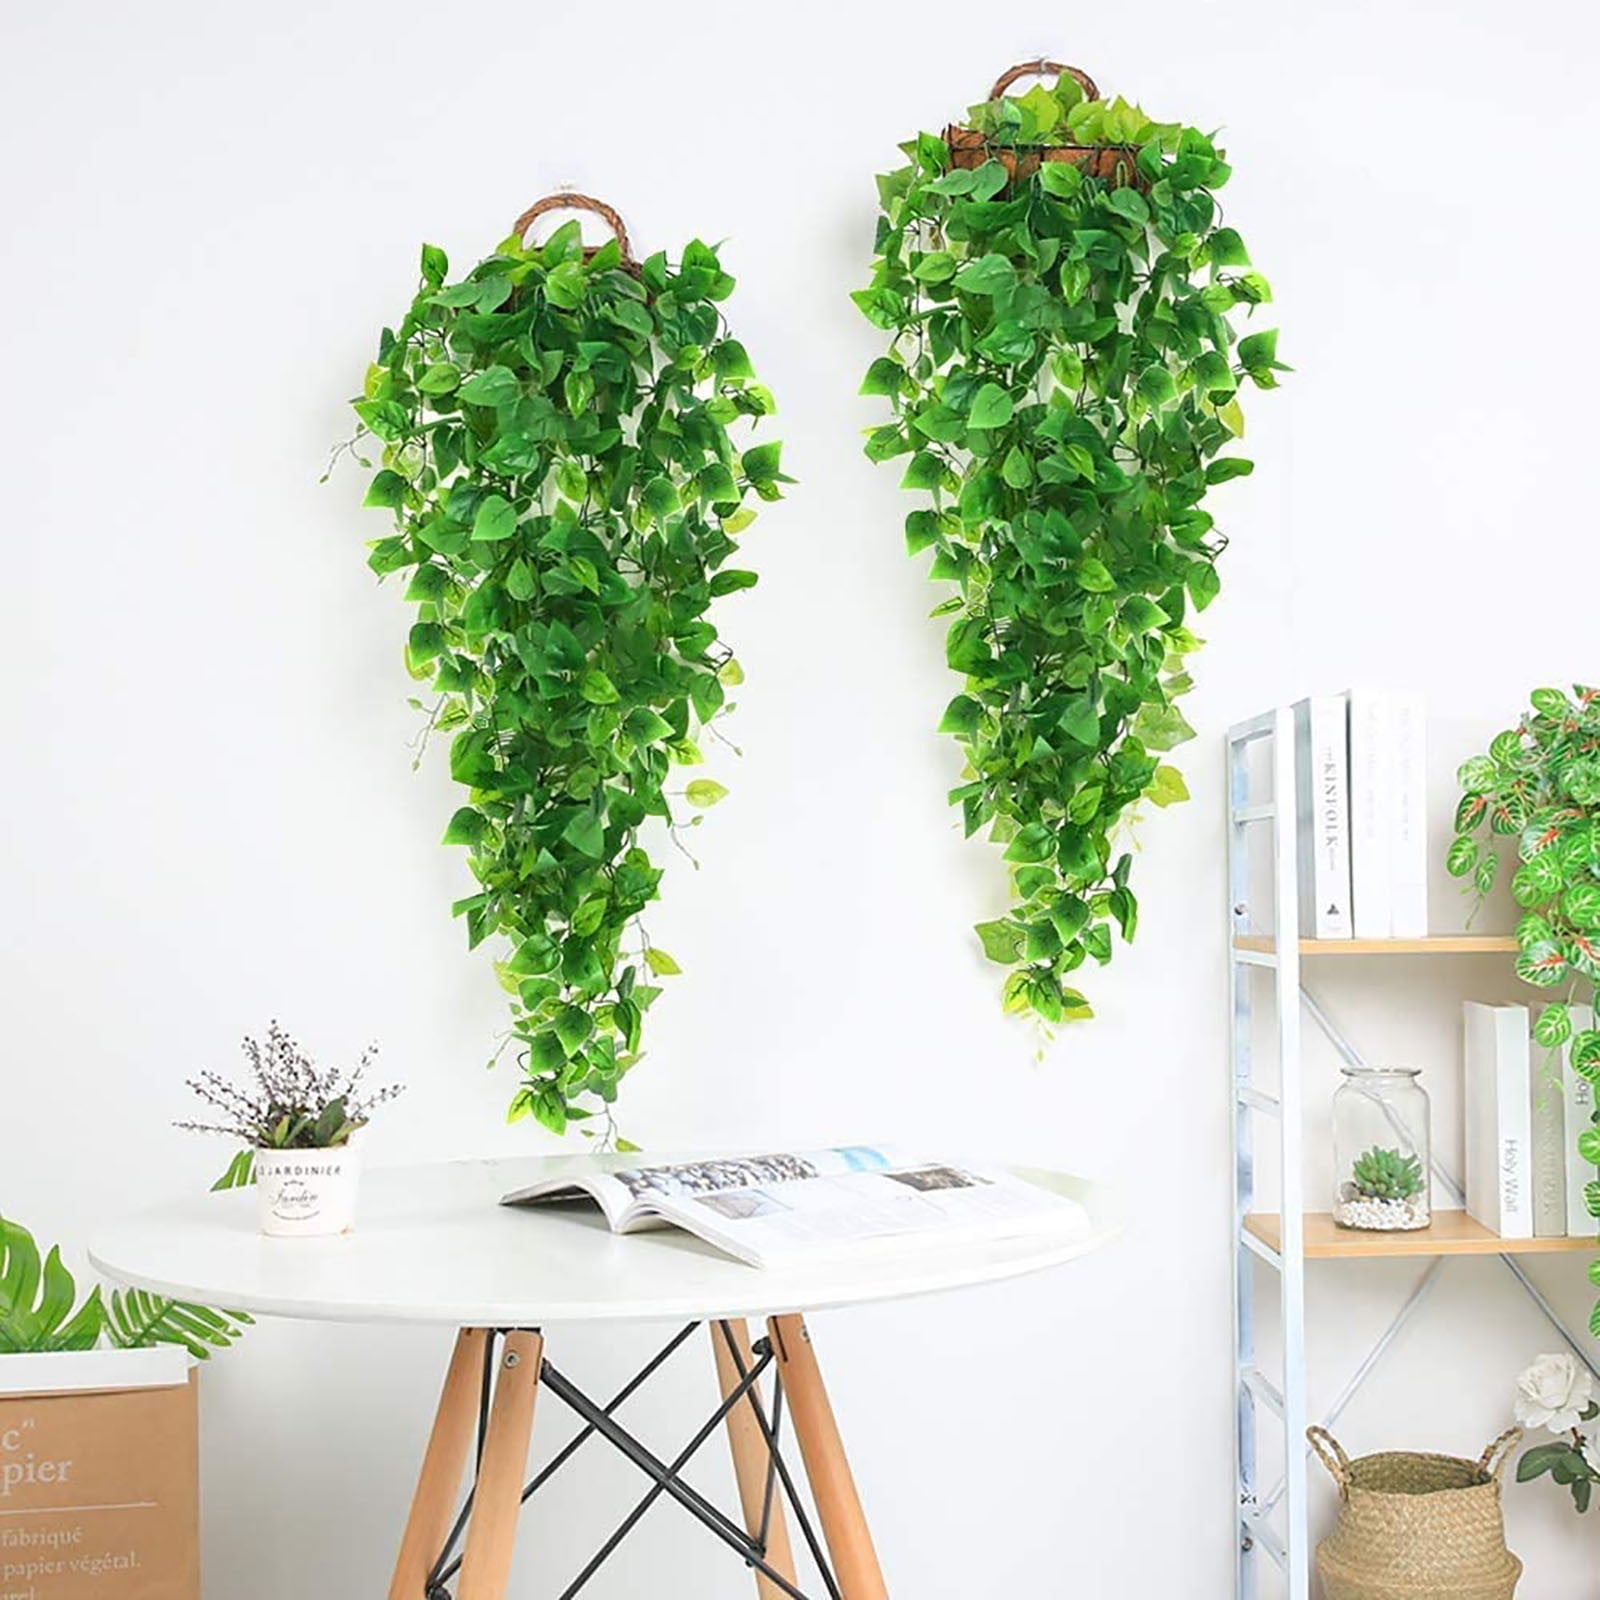 4 Pack Artifical Hanging Plants, 3.6 Feet Fake Ivy Plant for Wall Decor,  Faux Foliage Vines, PACK - Kroger